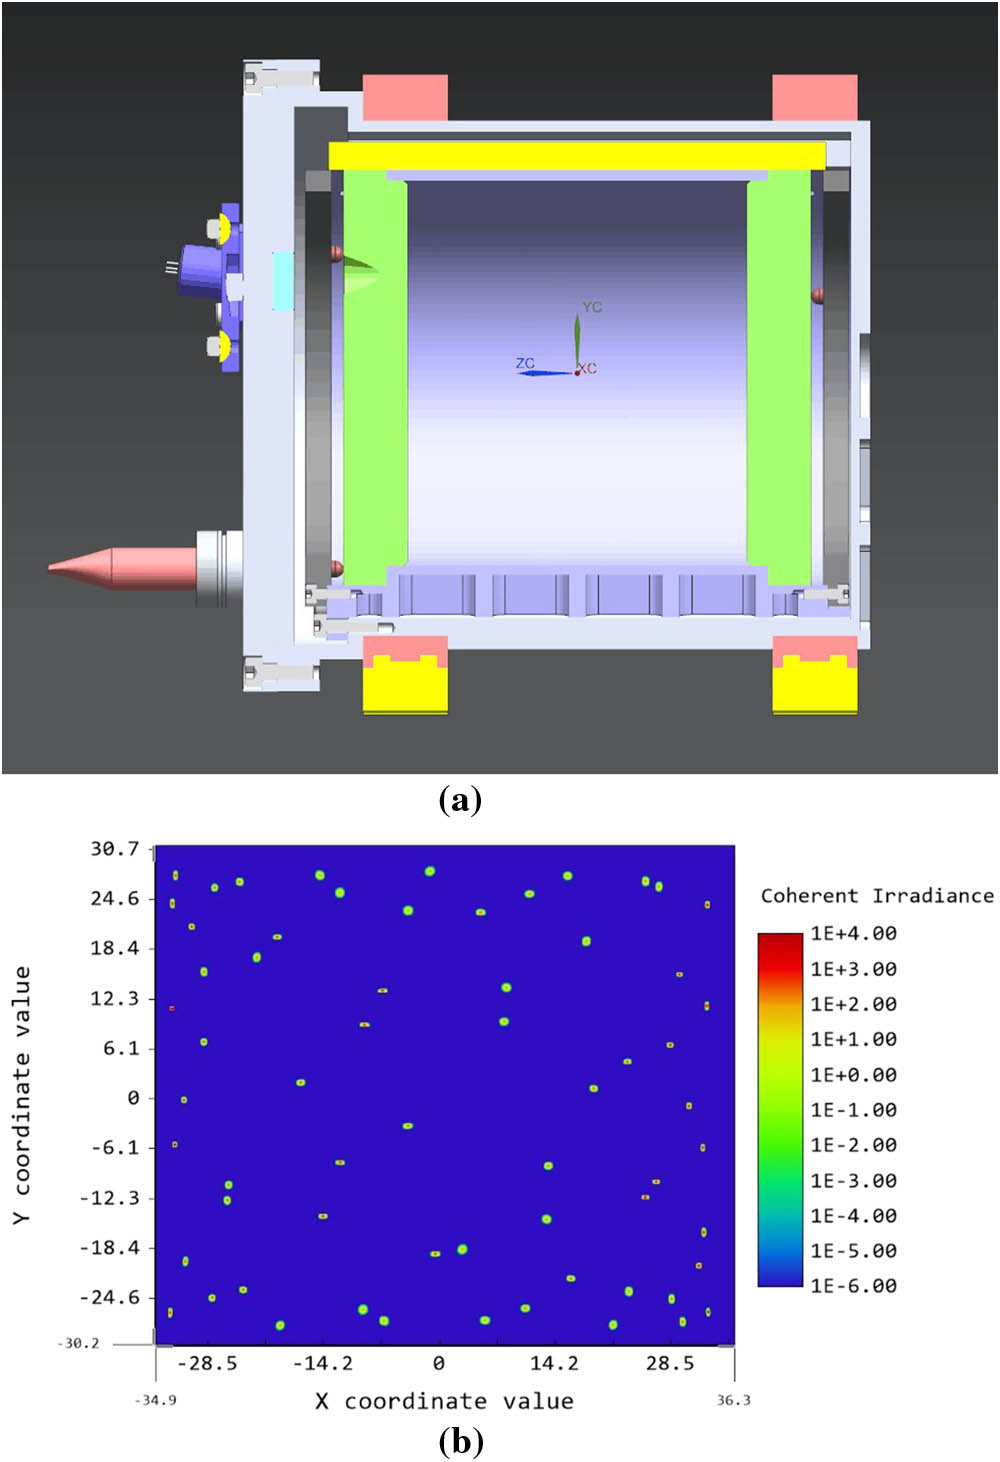 (a) Profile of the custom-built astigmatism Herriott cell. (b) Space and energy distributions of the light spot of the astigmatism Herriott cell shown in (a).